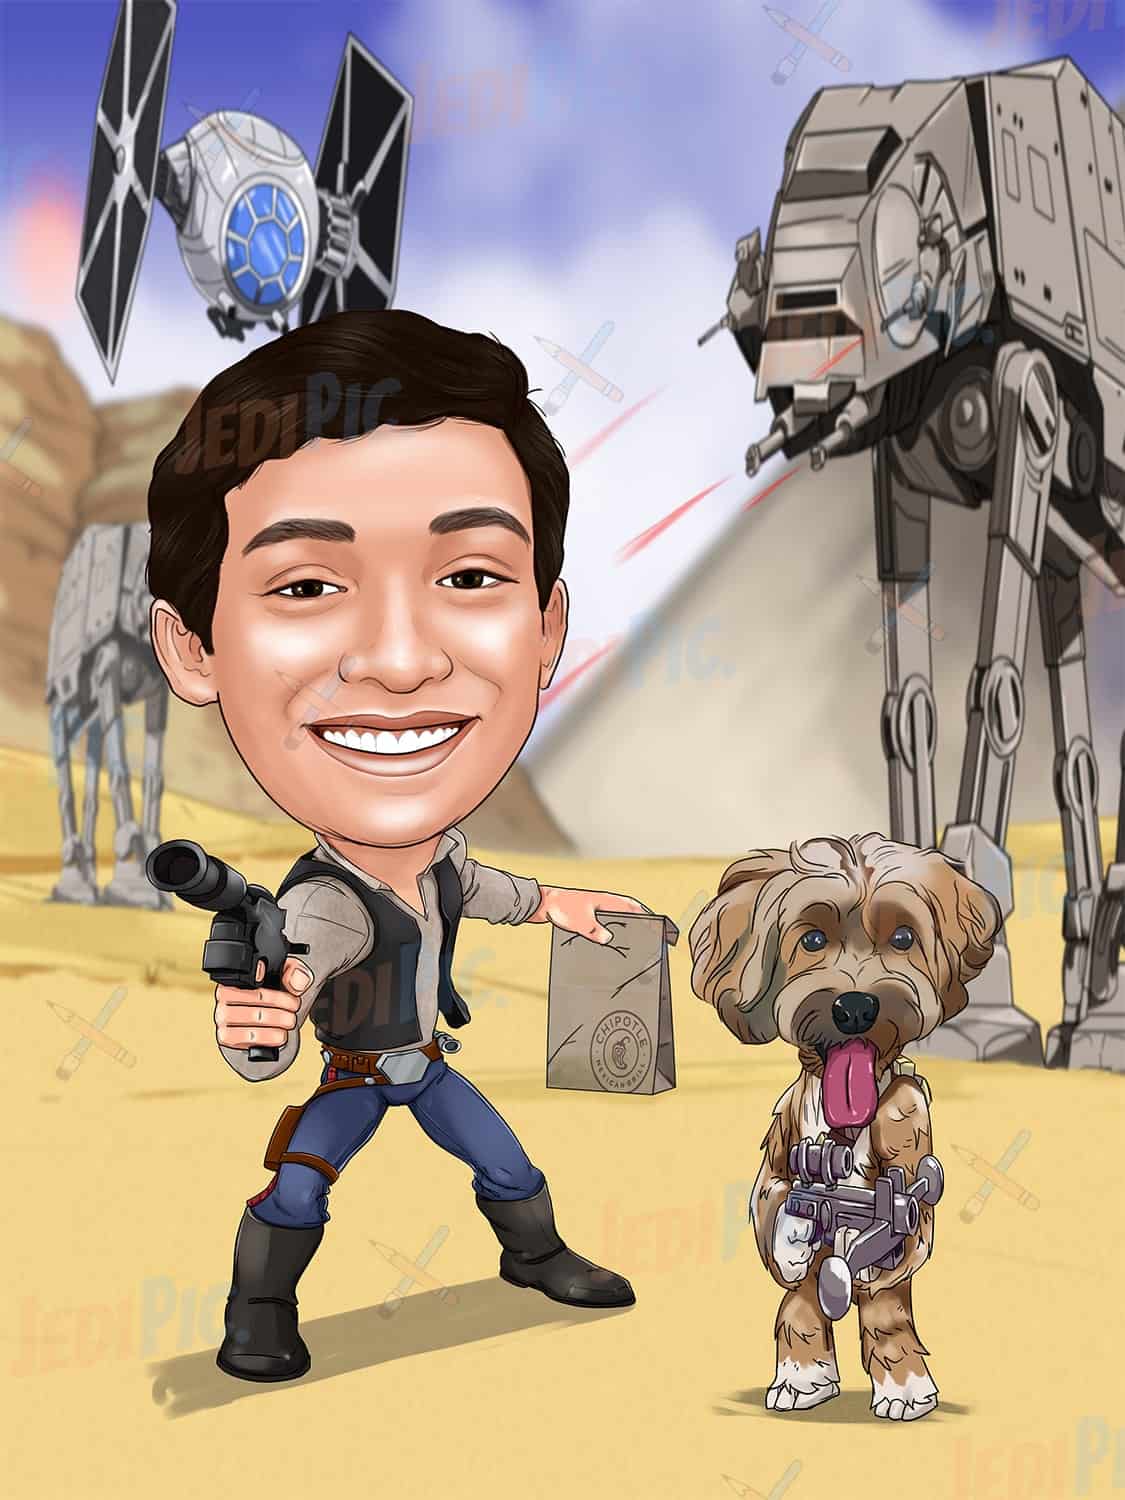 Owner And Pet In Star Wars Style